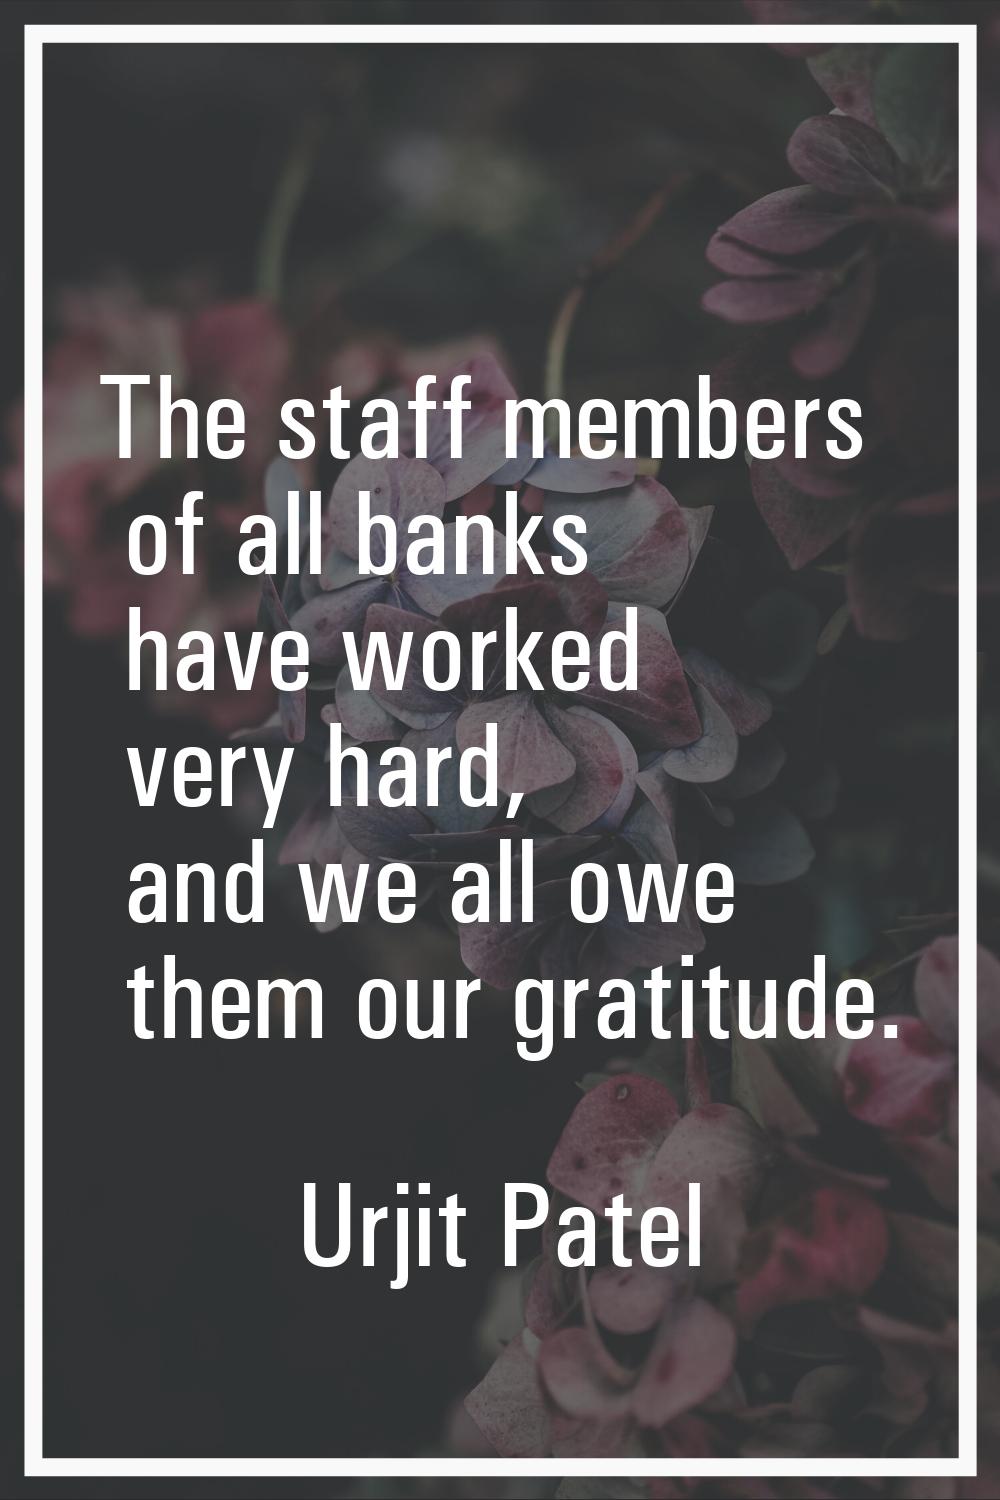 The staff members of all banks have worked very hard, and we all owe them our gratitude.